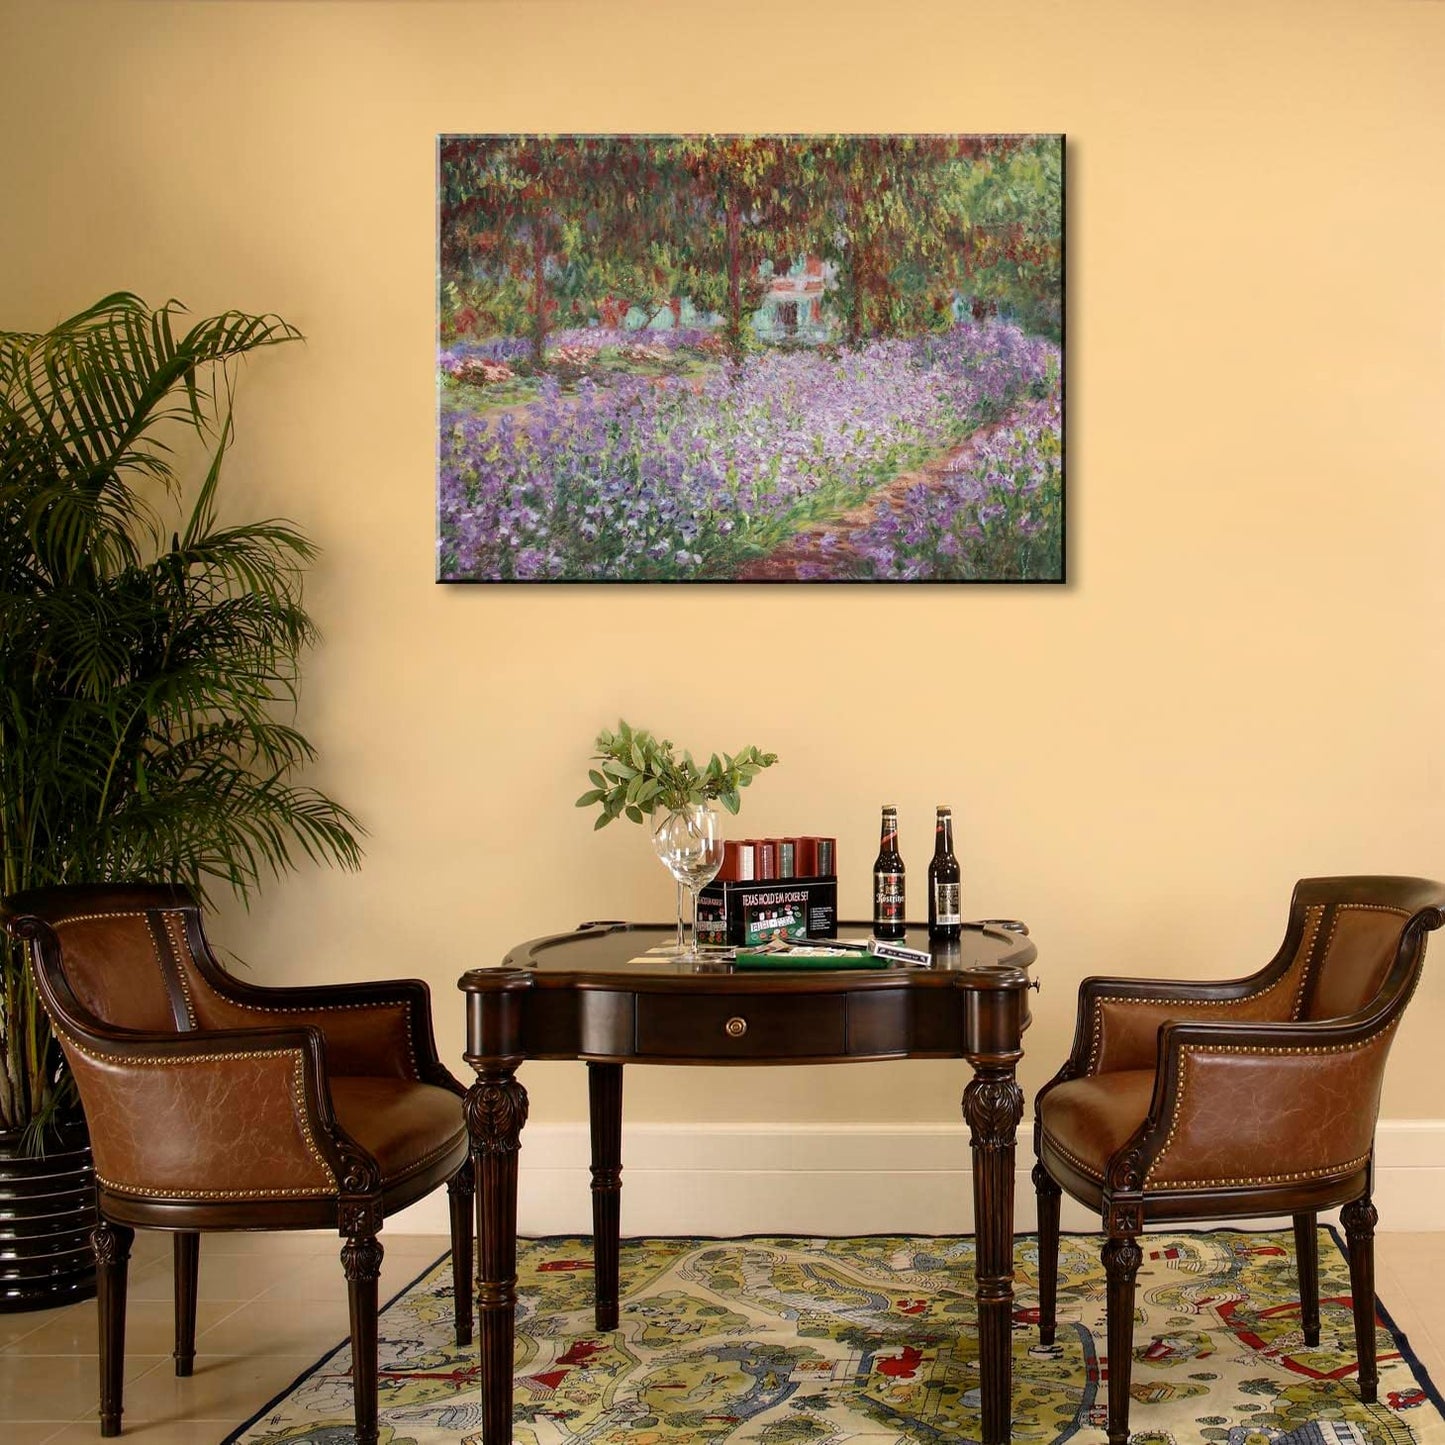 Irises in Monet's Garden, 1900 by Claude Monet - Large Canvas Art Wall Decor Painting Print Framed -24" x 36"